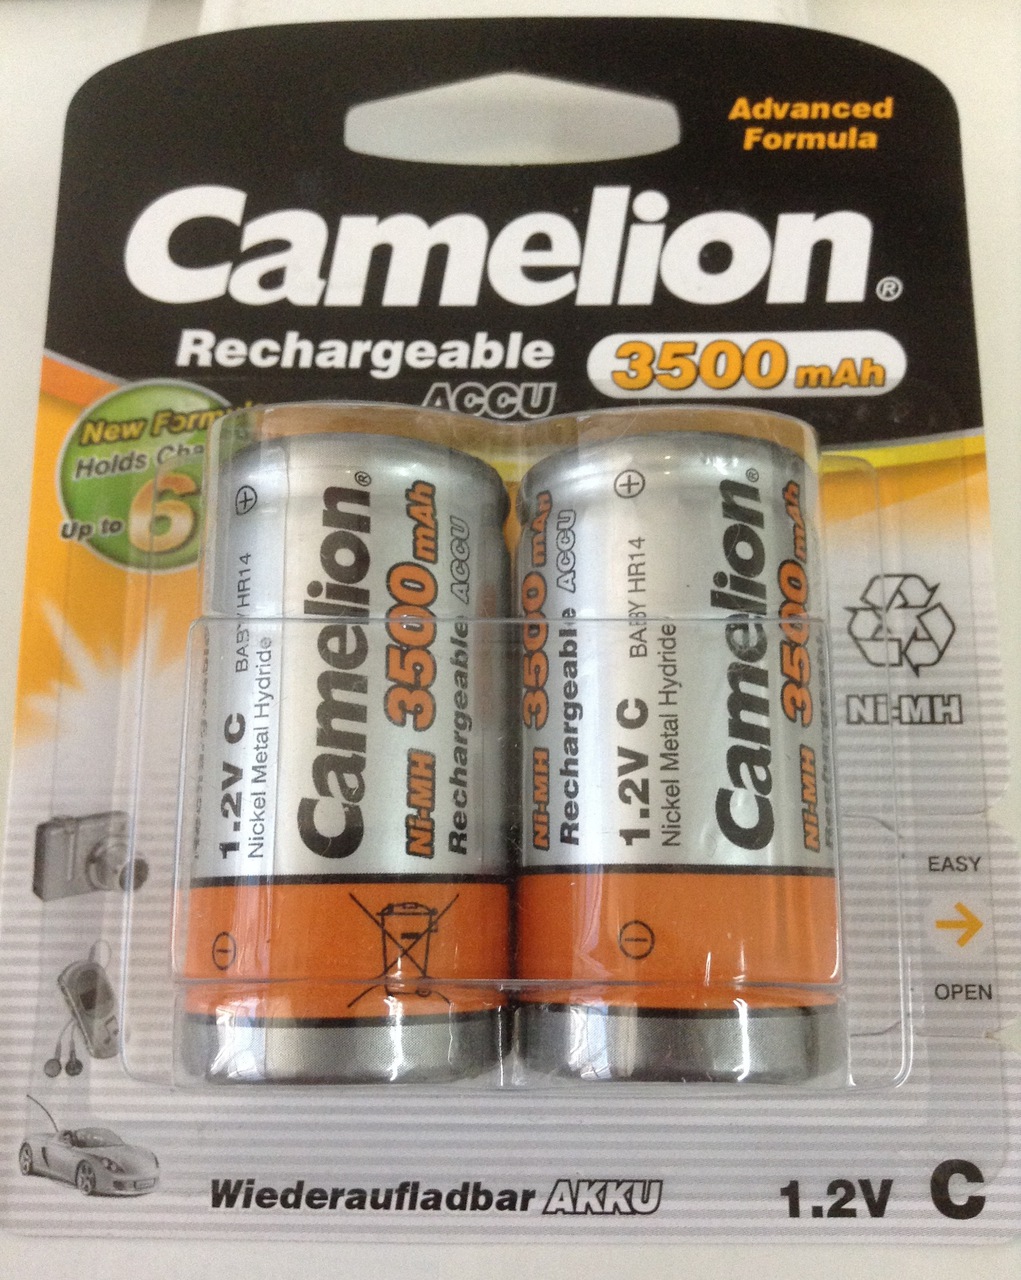 Camelion Advanced Formula C Rechargeable NiMH Batteries 3500mAh 2 Pack Retail + FREE SHIPPING!